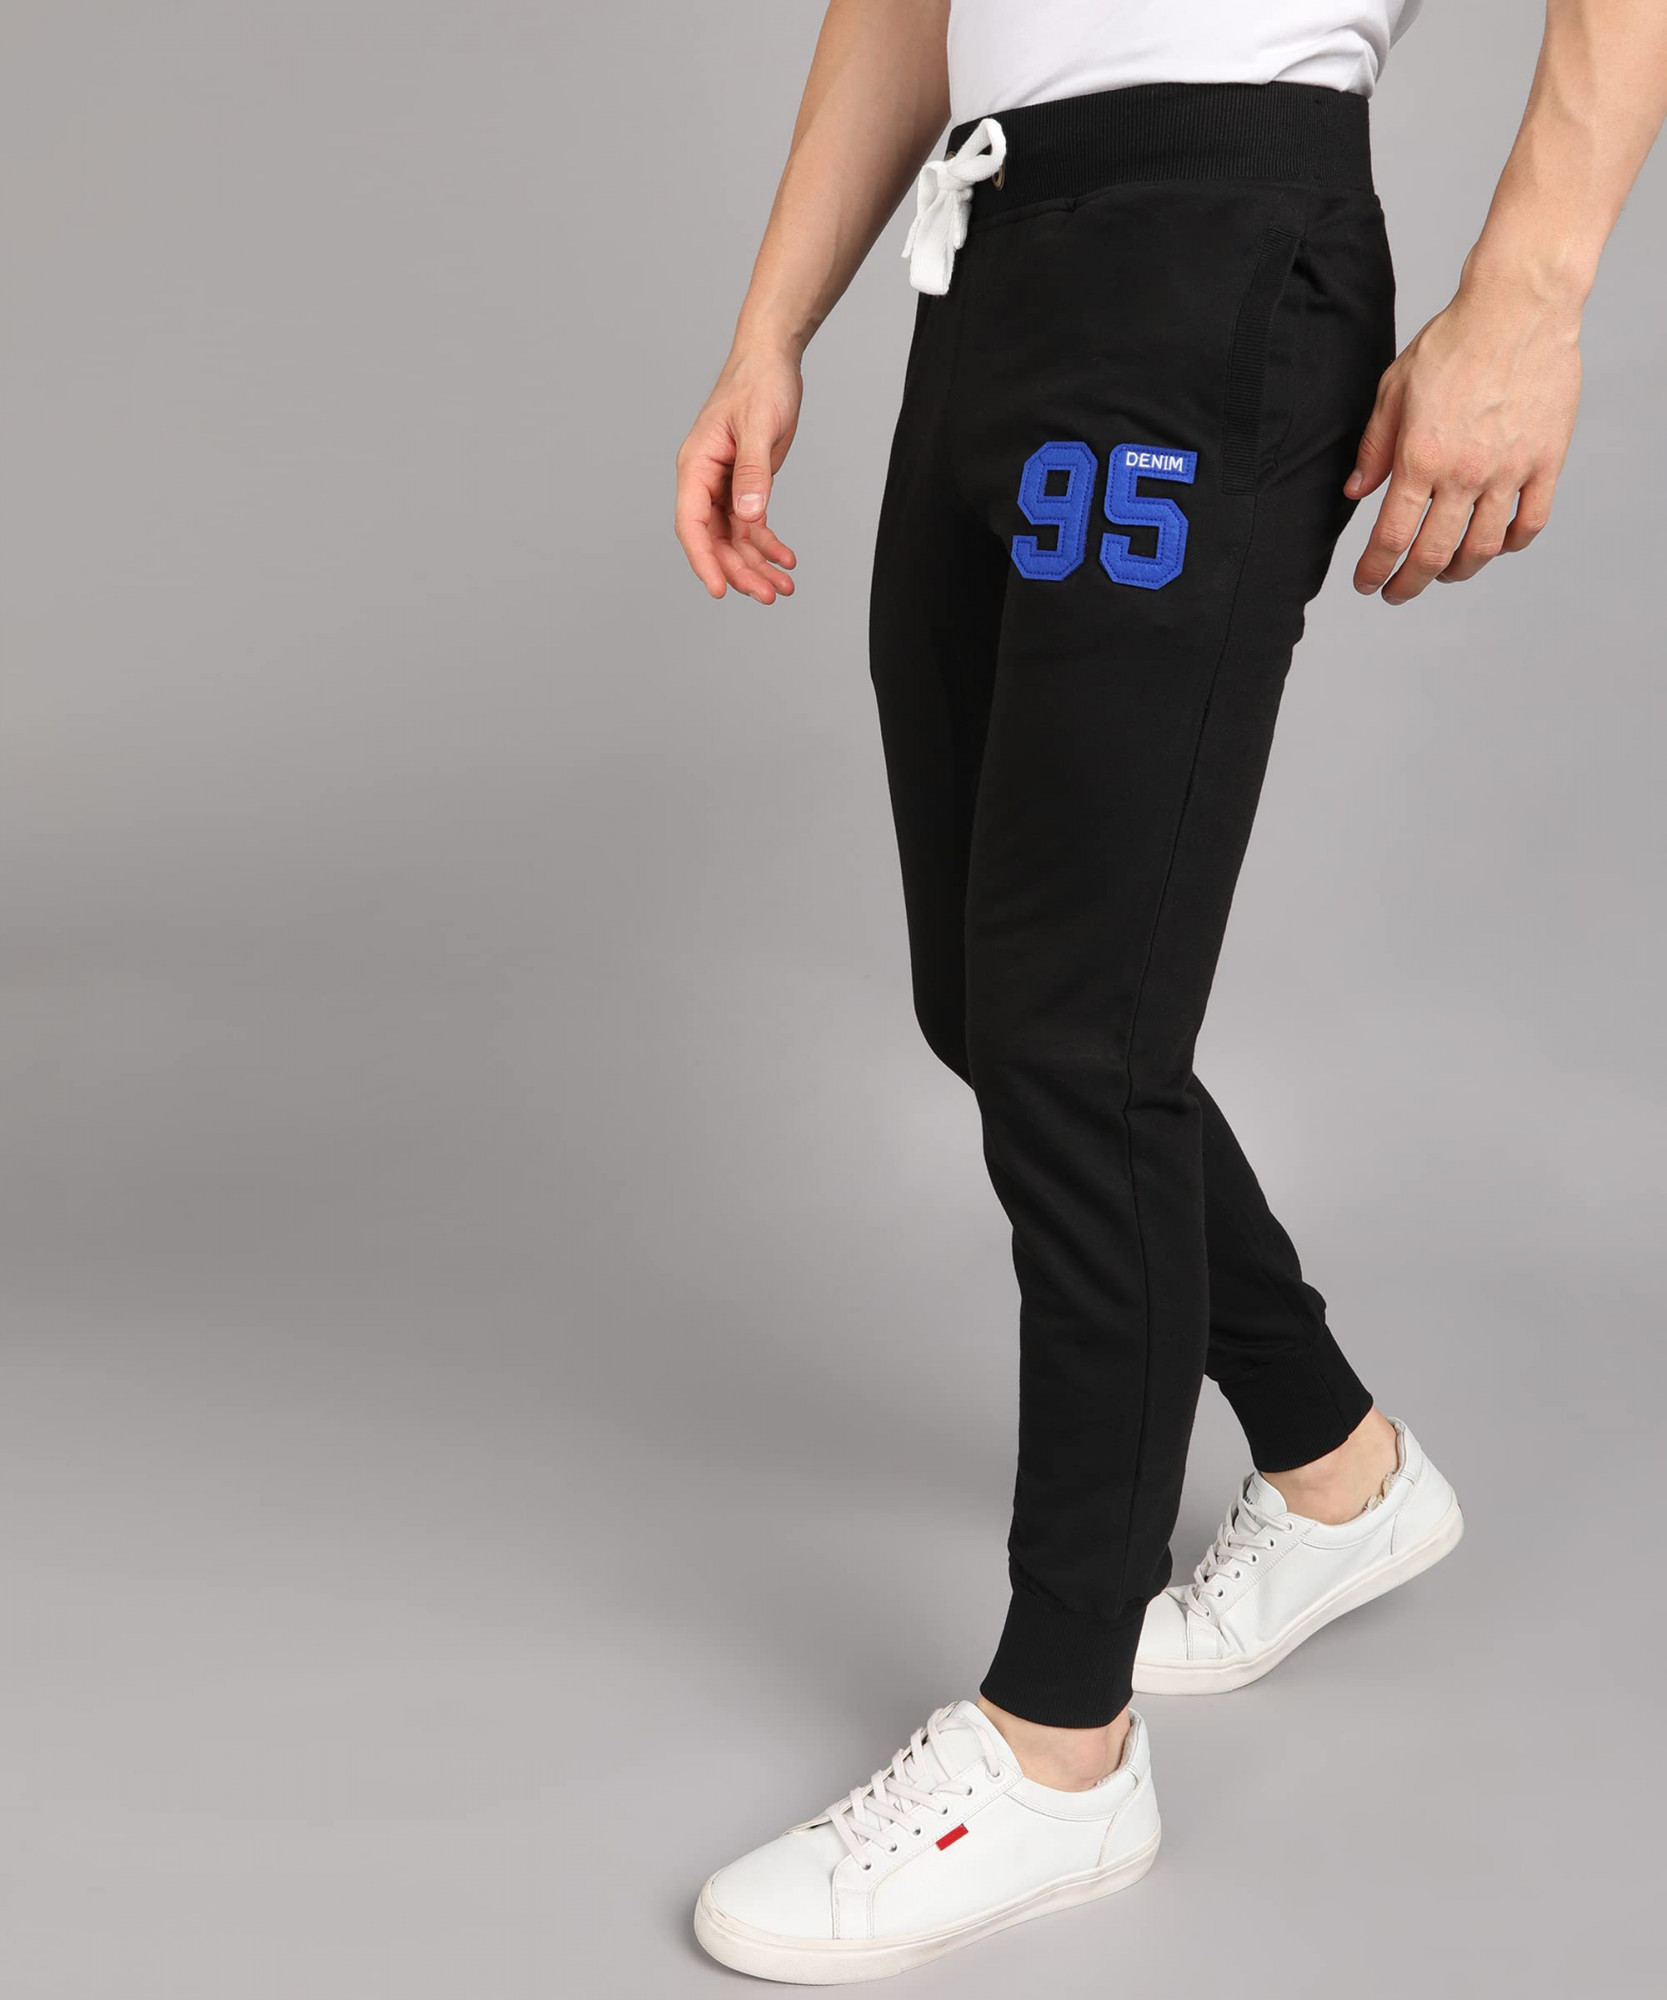 Mens Black Gym Jogger Track Pants Casual Fitness Sportswear Bottoms With Skinny  Sweatpants Gym Trousers For Men From Brandstyleclothing, $15.08 | DHgate.Com